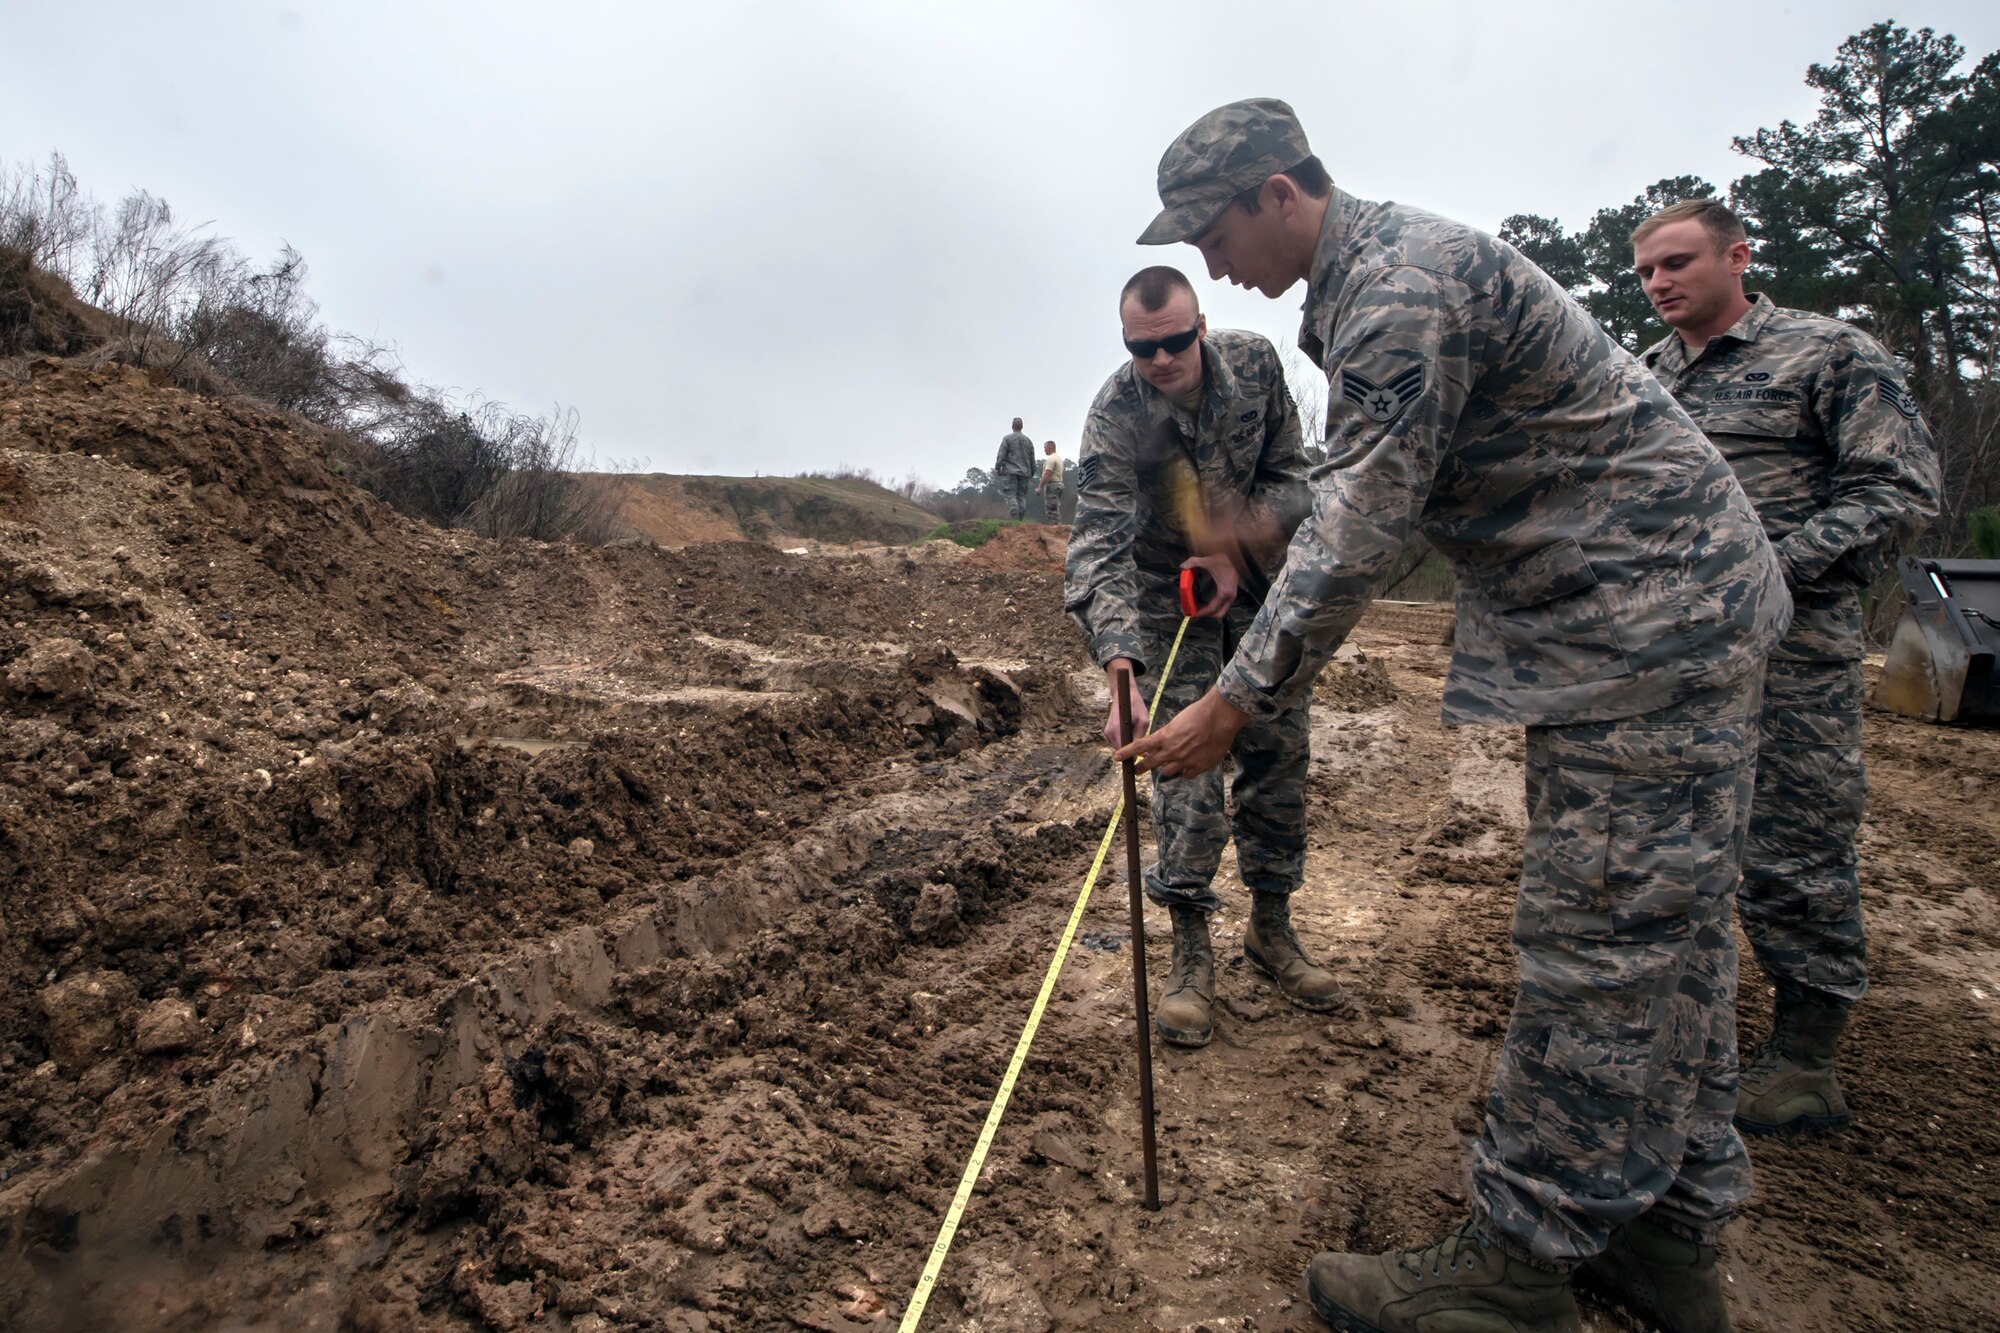 Airmen from the 23d Civil Engineer Squadron mark a perimeter, Feb. 15, 2018, at Moody Air Force Base, Ga. Airmen from the 23d CES participated in a Prime Base Engineer Emergency Force training day to prepare for some of the wartime tasks they could encounter while in a deployed environment. (U.S. Air Force photo by Airman Eugene Oliver)